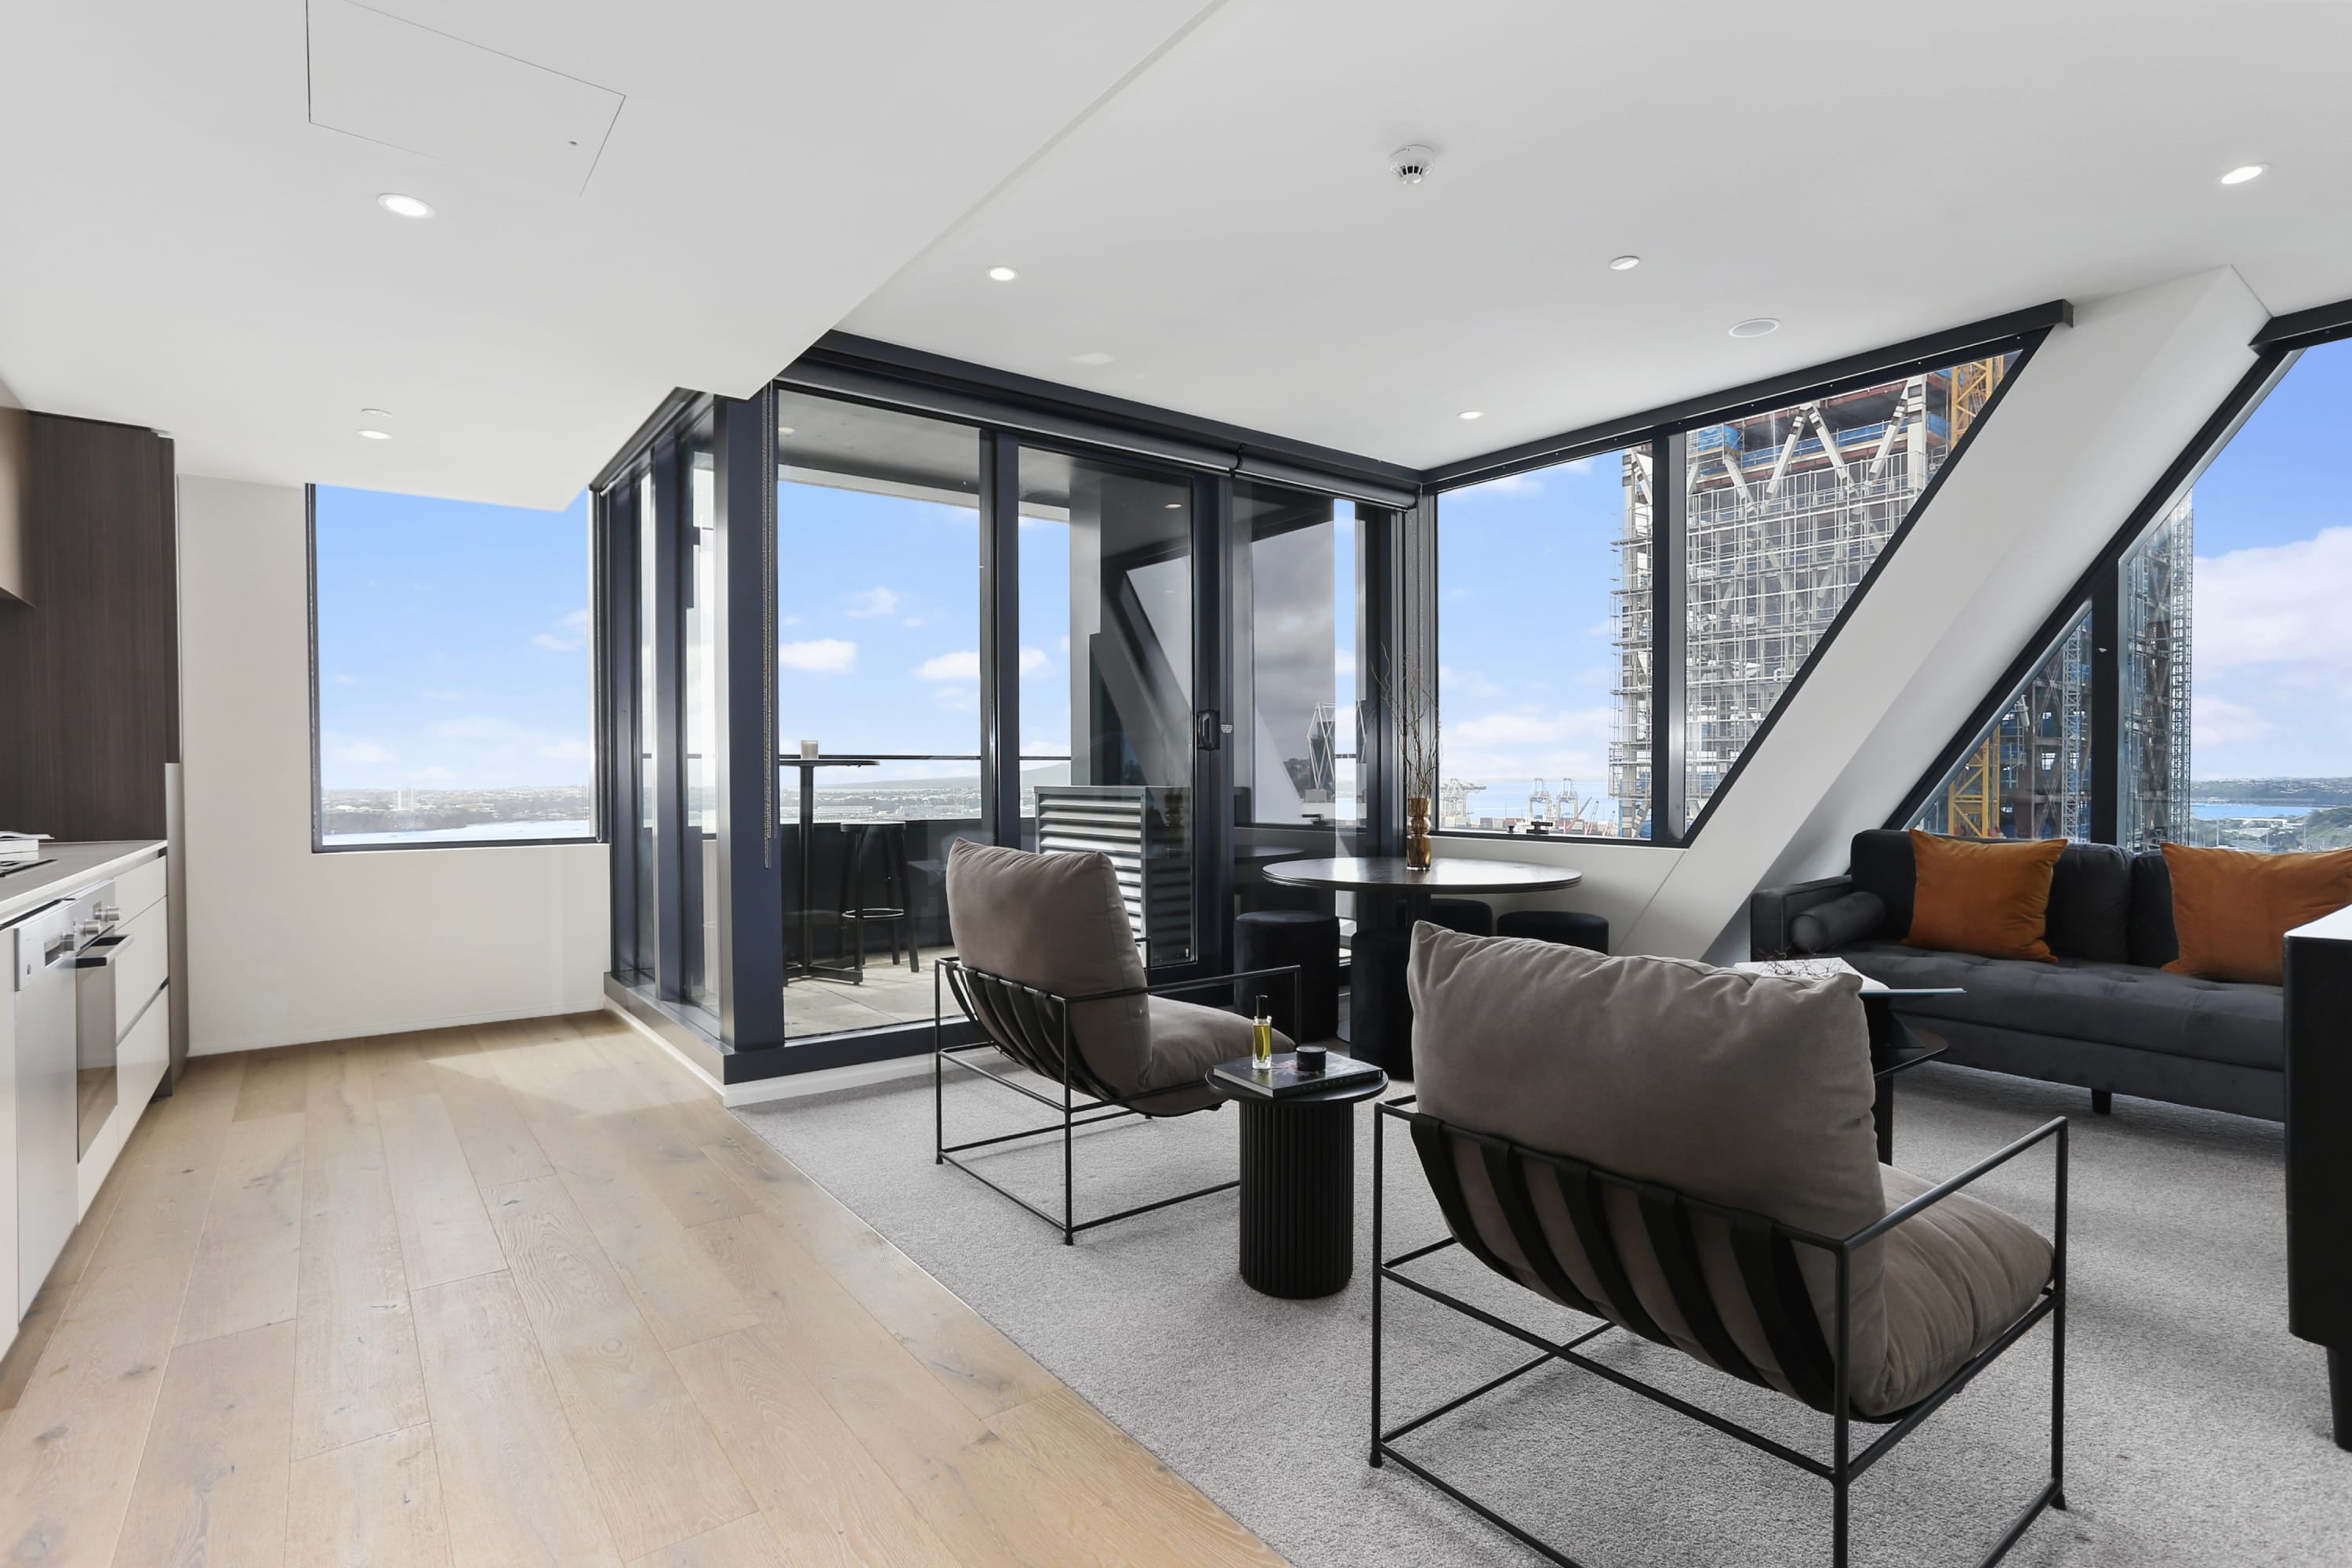 Property Image 2 - Modern and Elegant Apartment with Magical Views